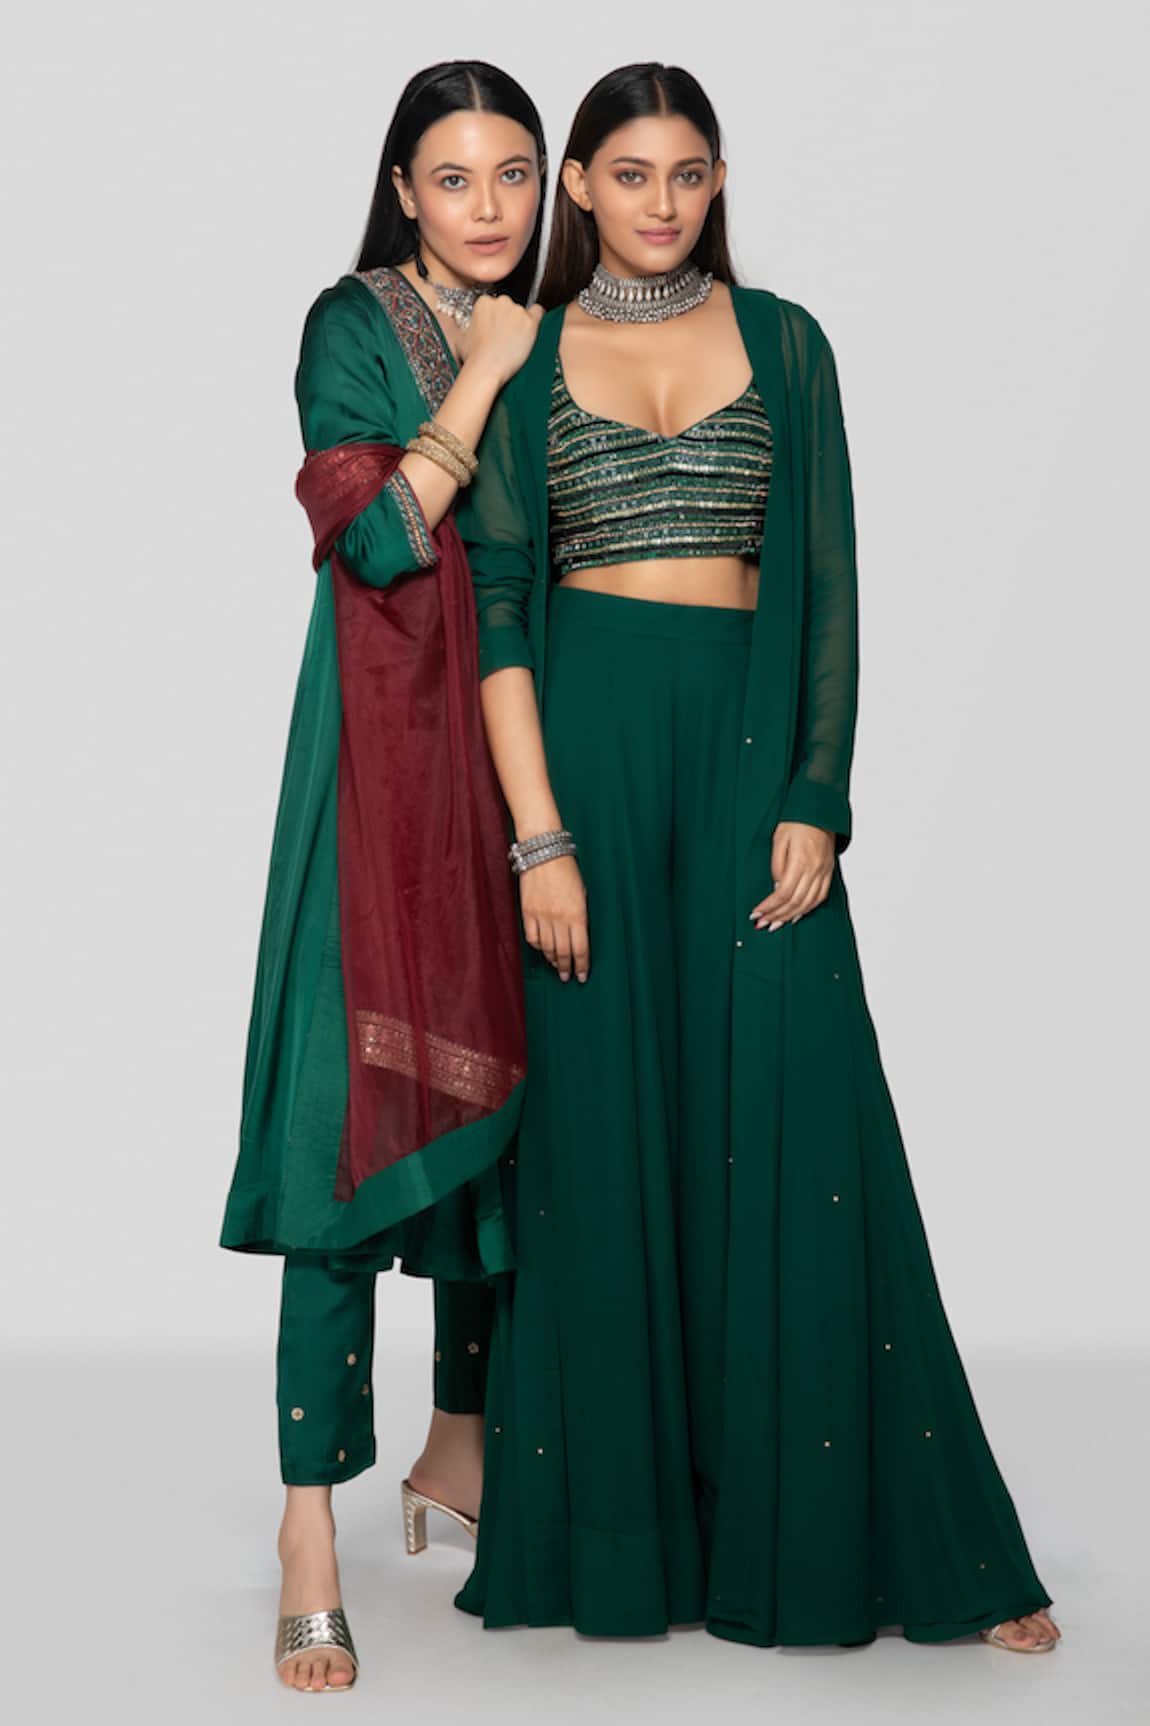 5 Indian Formal Wear Outfits Every Woman Must-Own – Vishnu